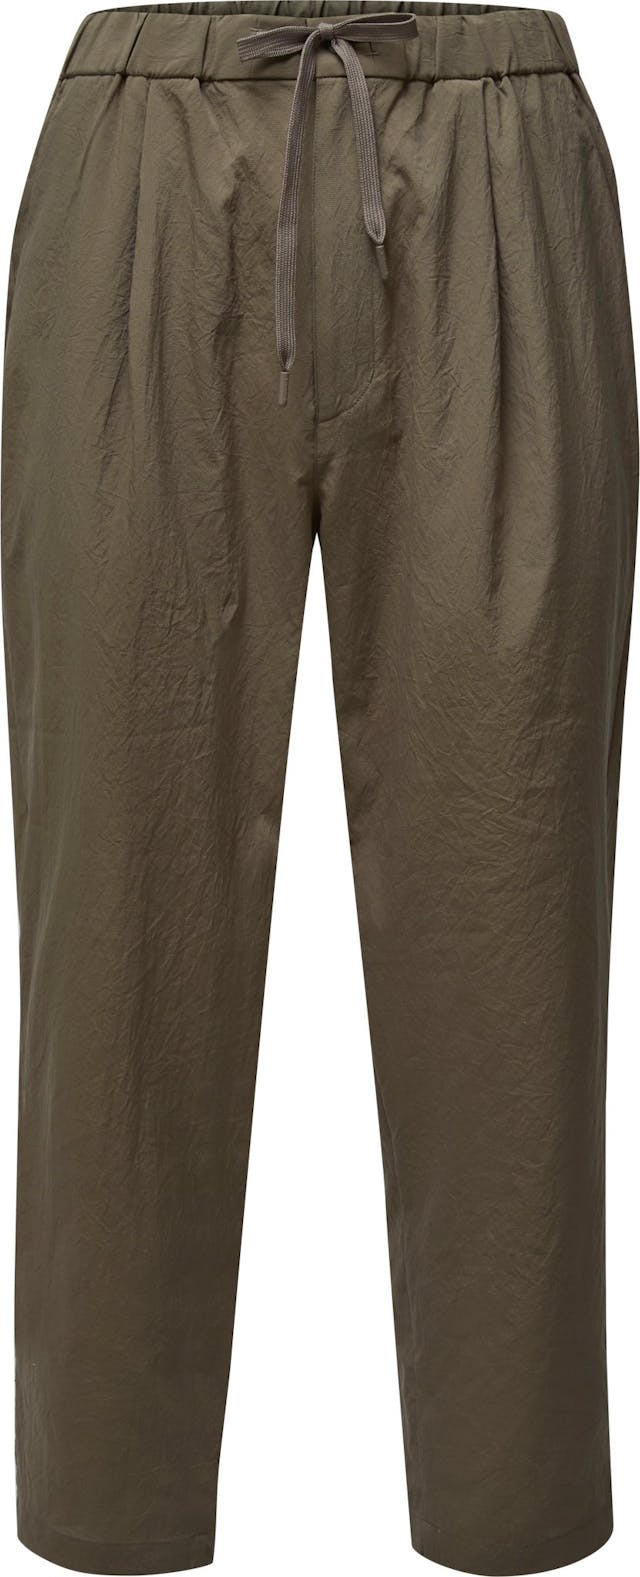 Product image for Quick Dry Pants - Men's